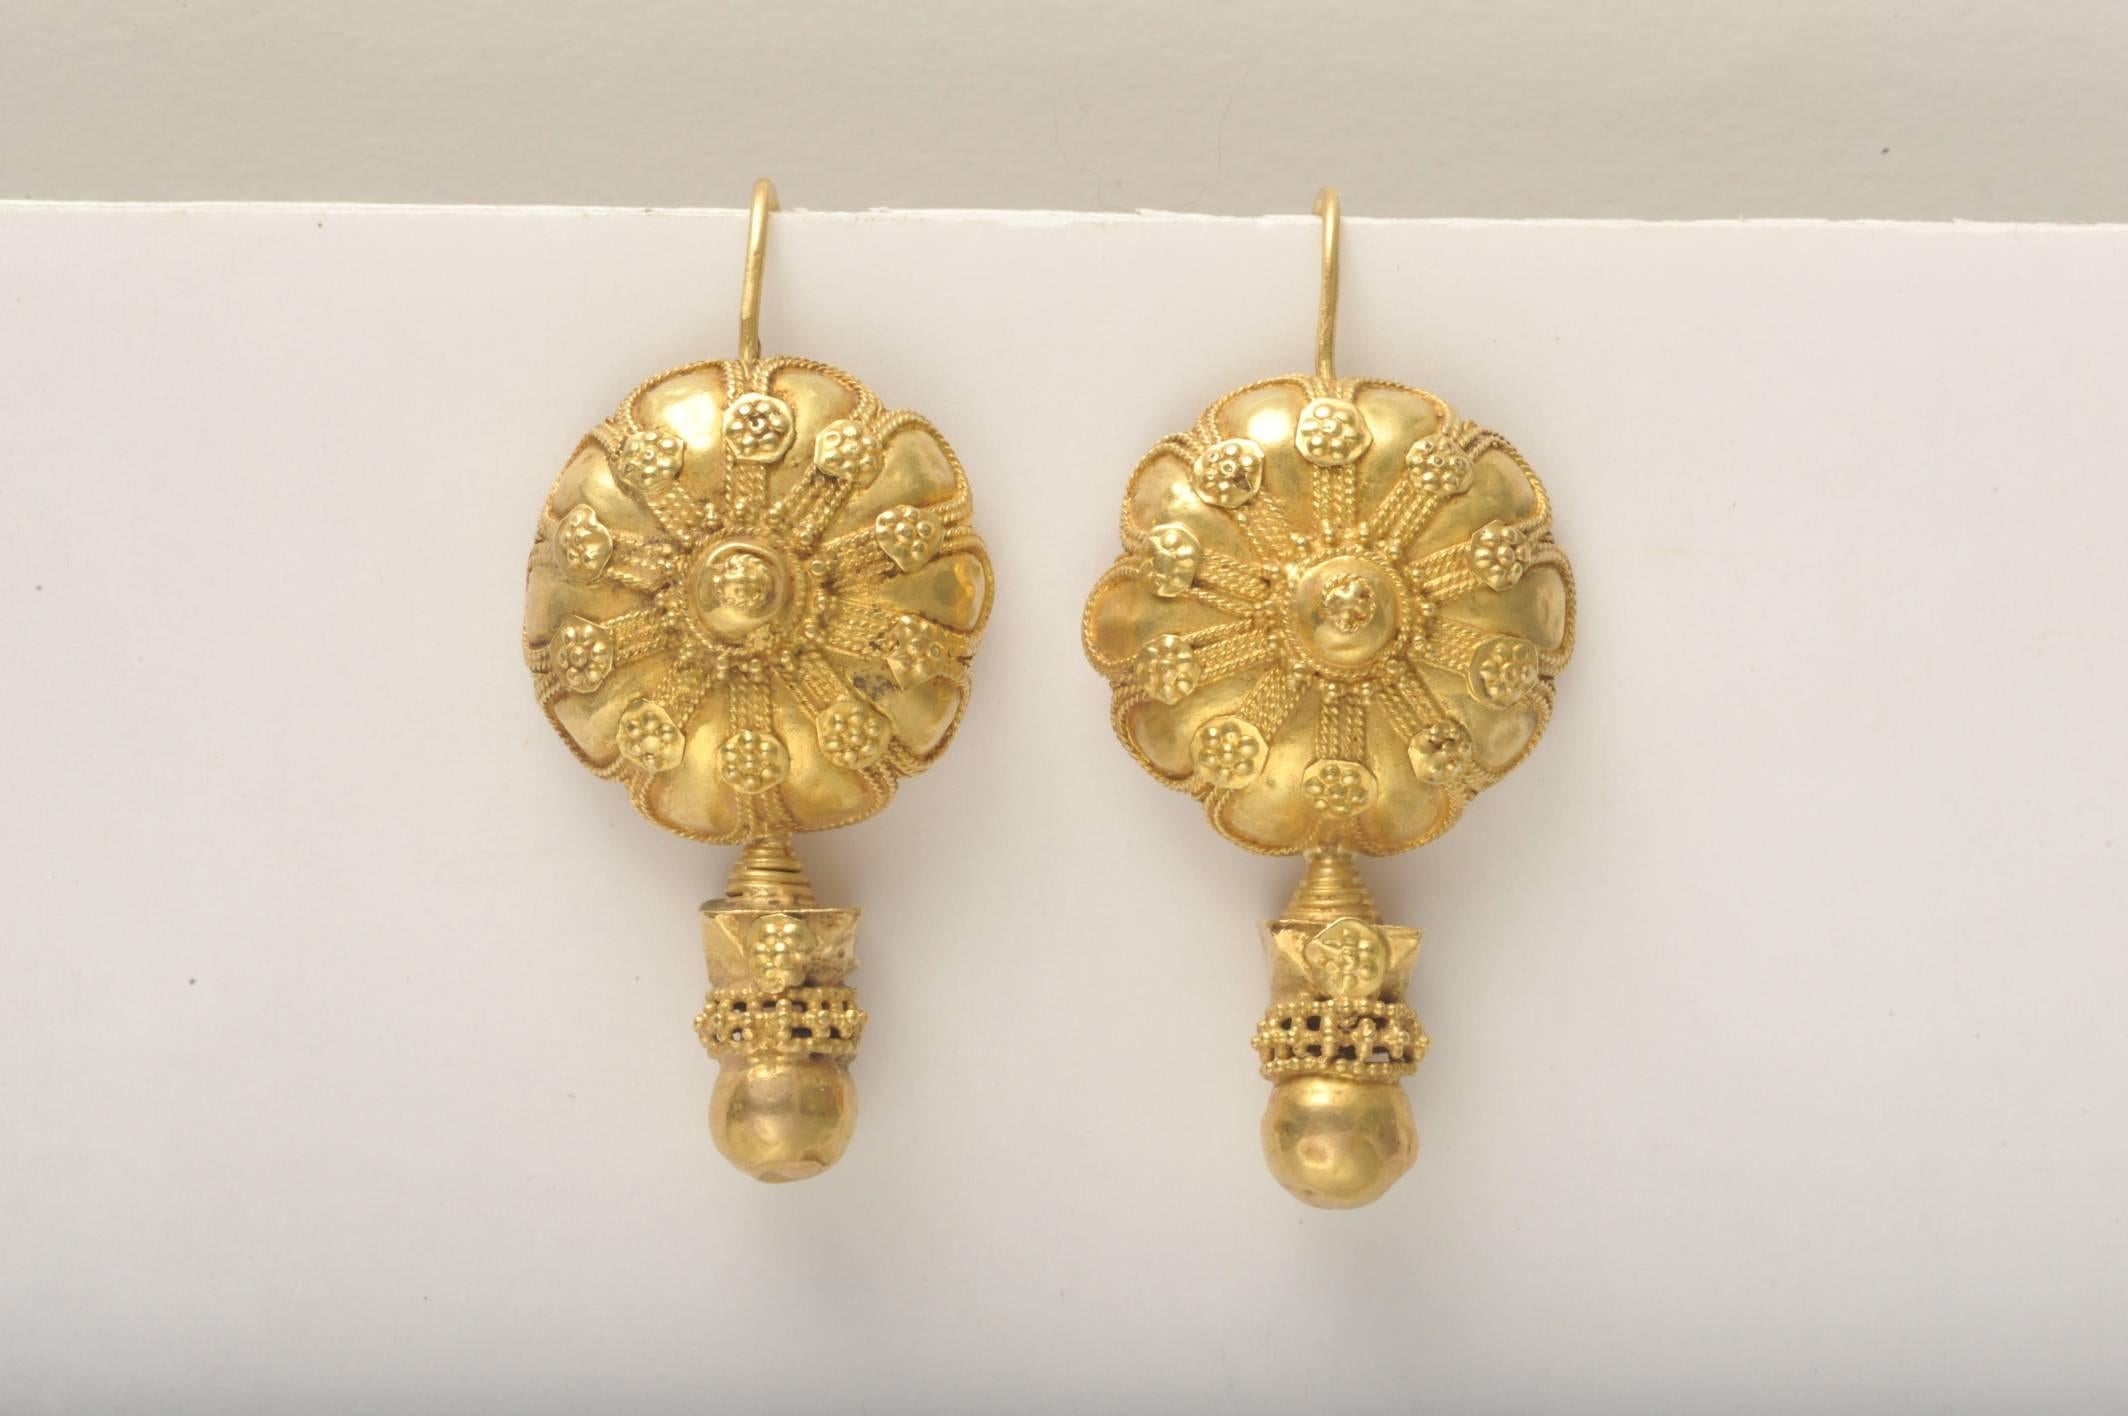 This pair of earrings is rare and exceptional.  From the early 1900's India, 22K gold with incredibly fine granulation work.  Long earring wire has been filed down to accommodate smaller Westernized ear piercings.  These are a rare find.